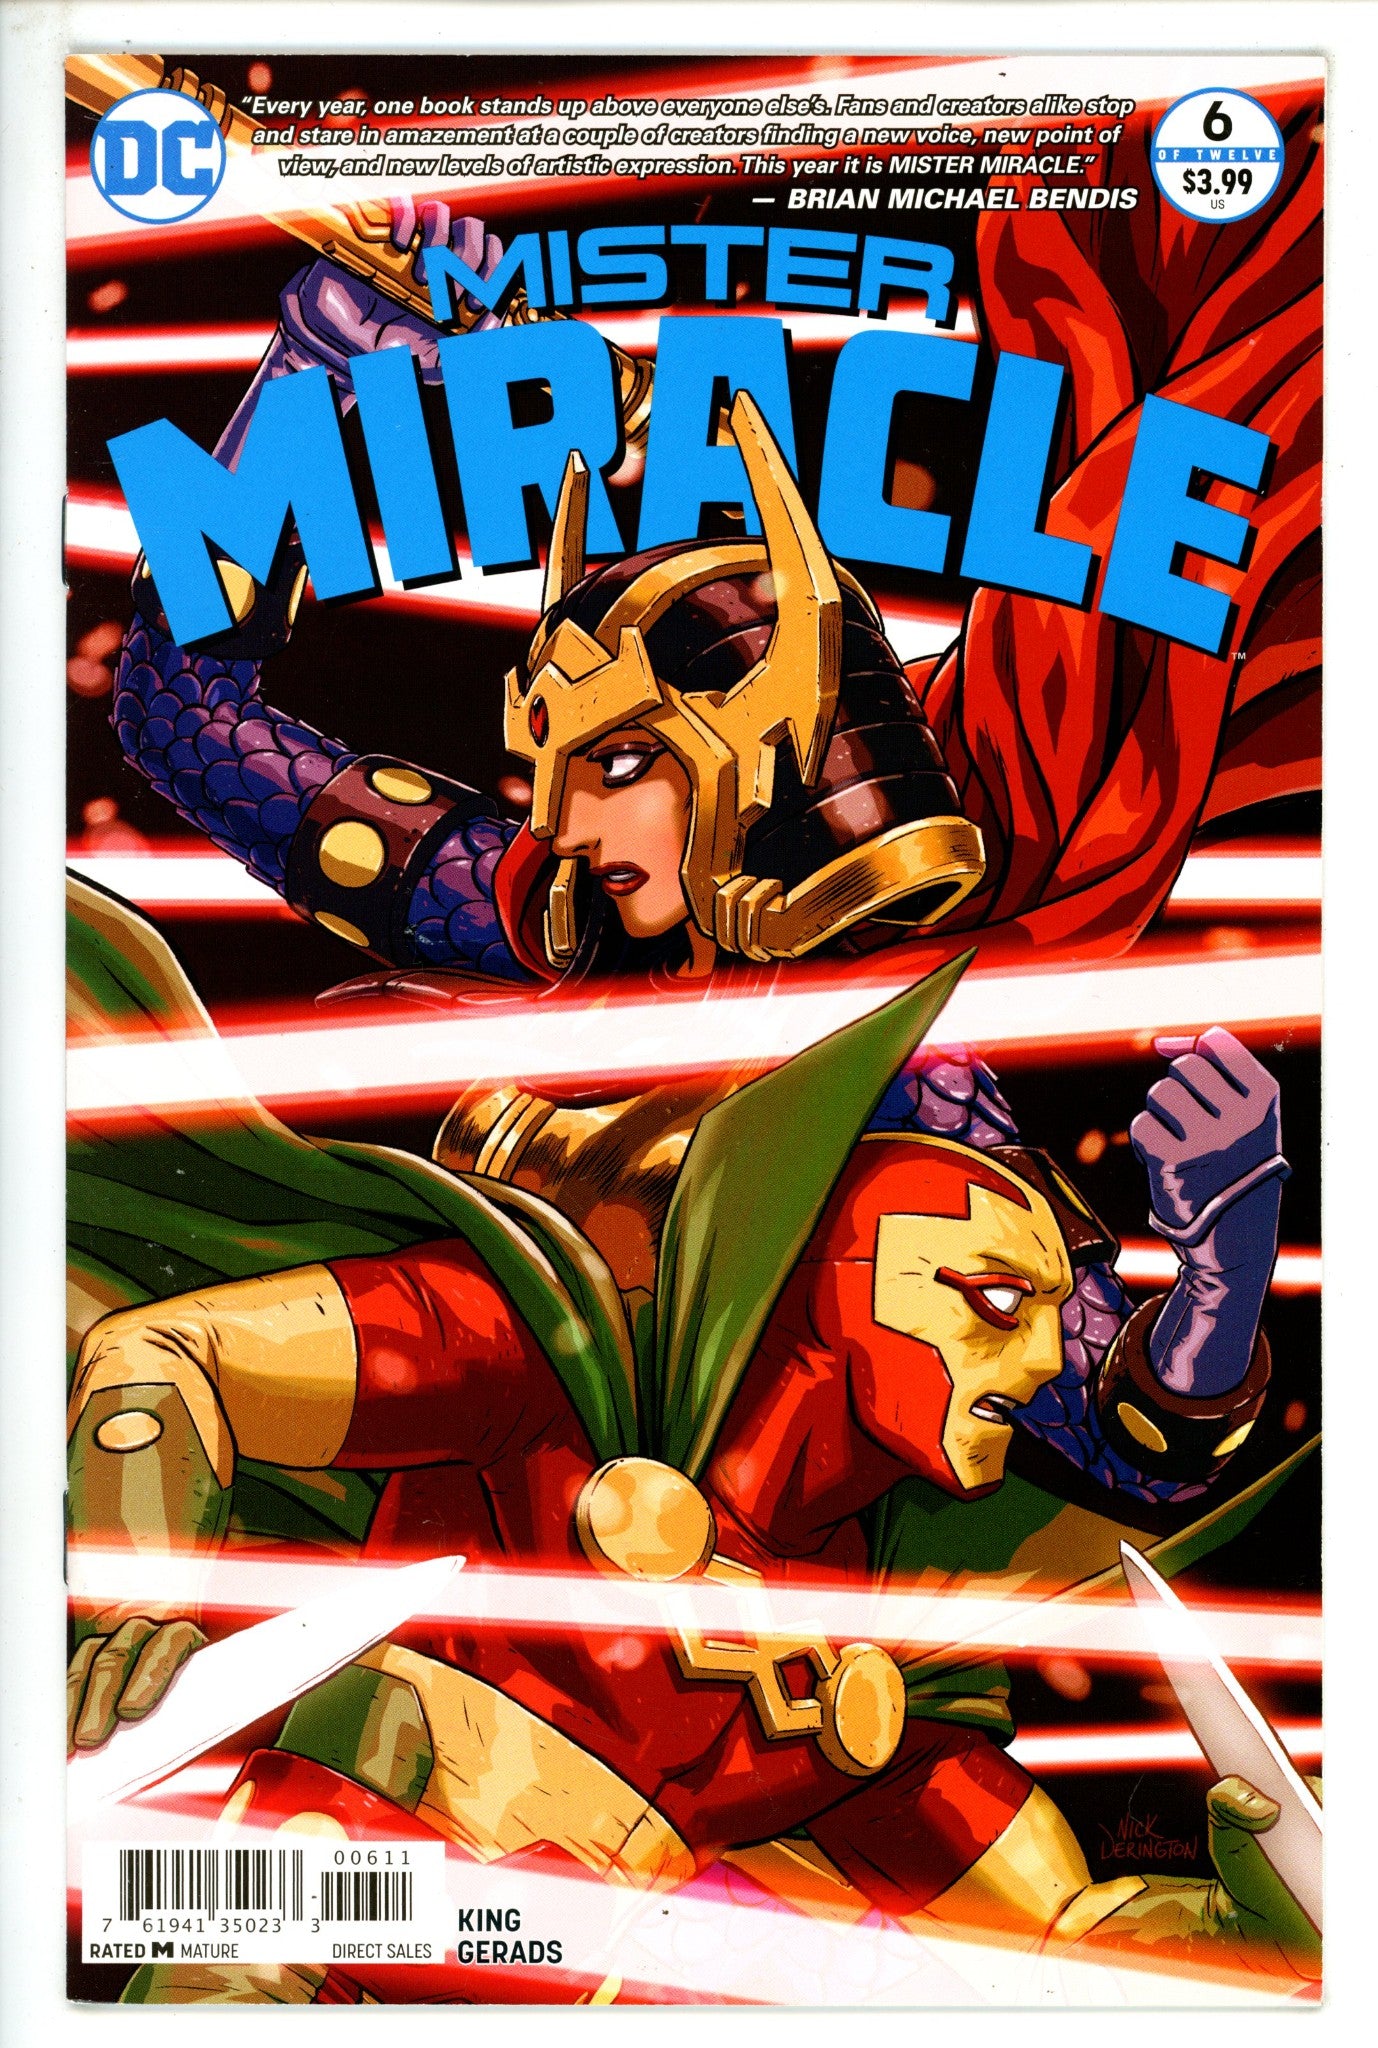 Mister Miracle Vol 4 6 High Grade (2018) 